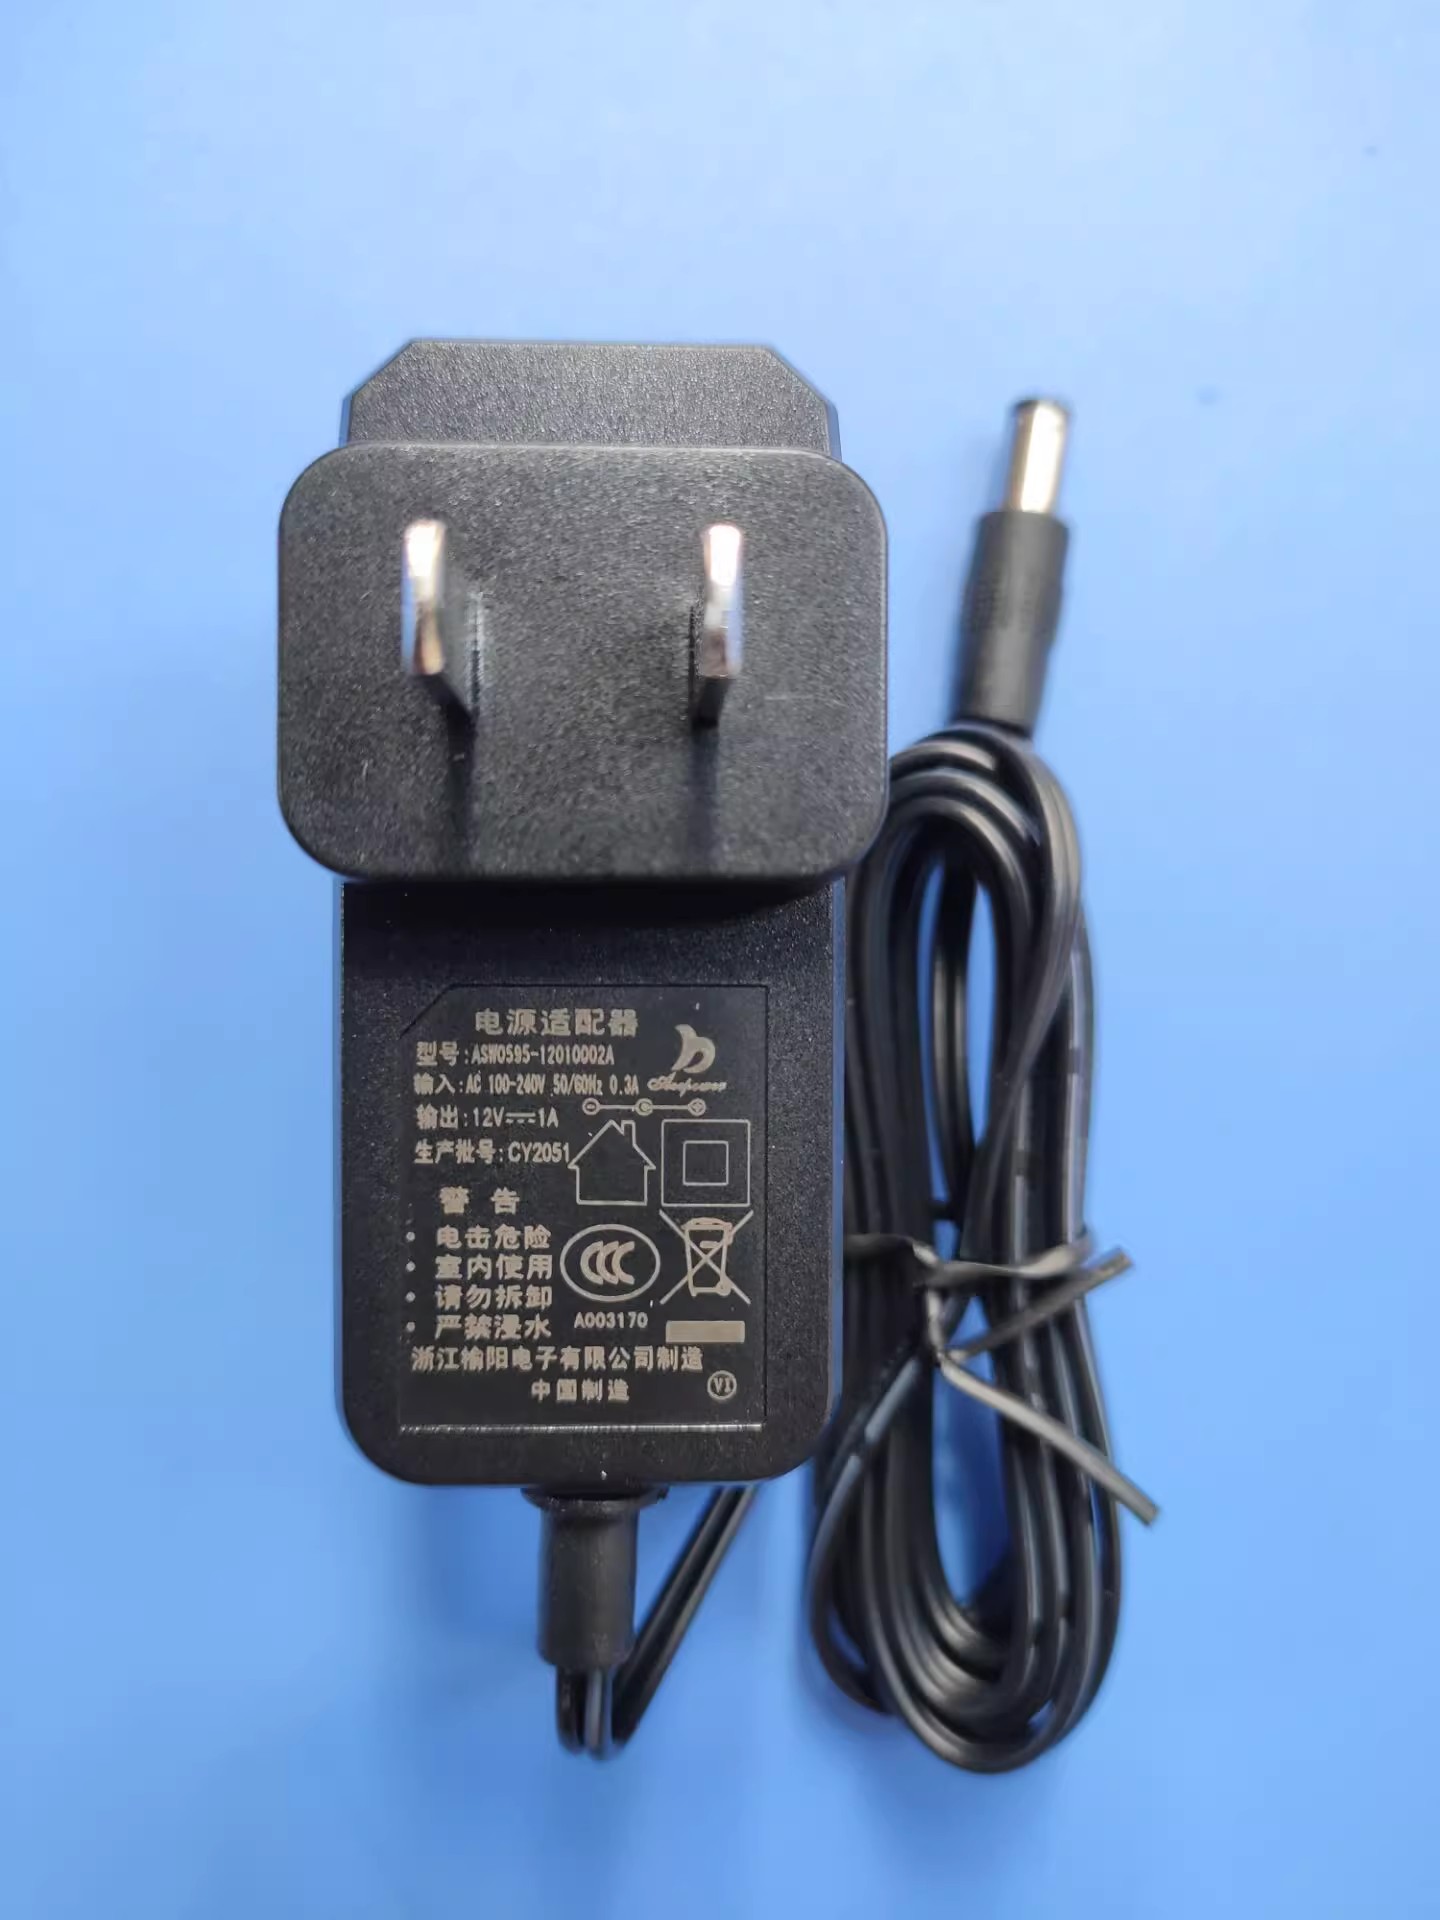 *Brand NEW* 12V 1A AC DC ADAPTHE ASW0595-12010002A POWER Supply